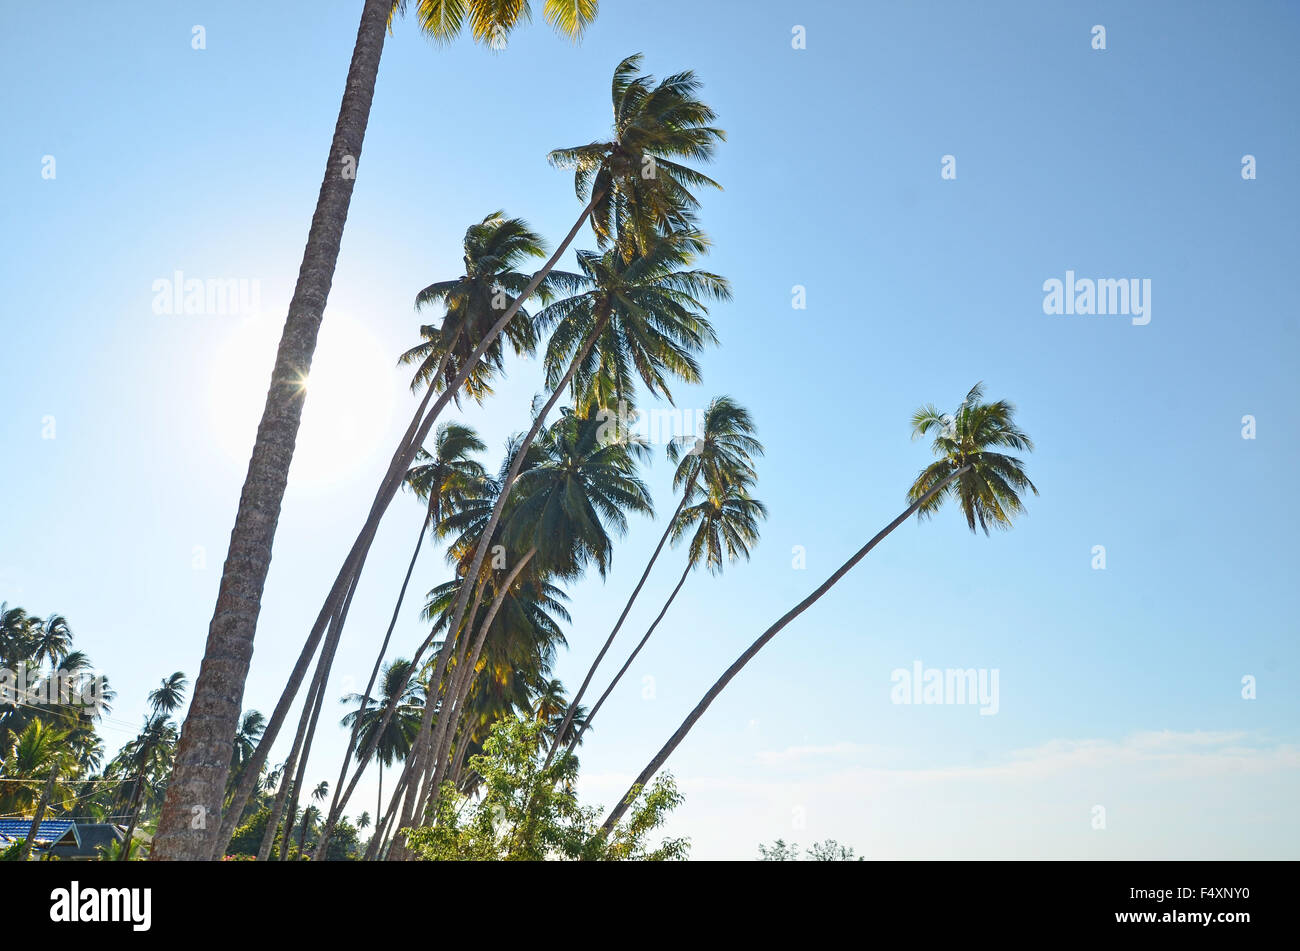 Coconut trees by the beach Stock Photo